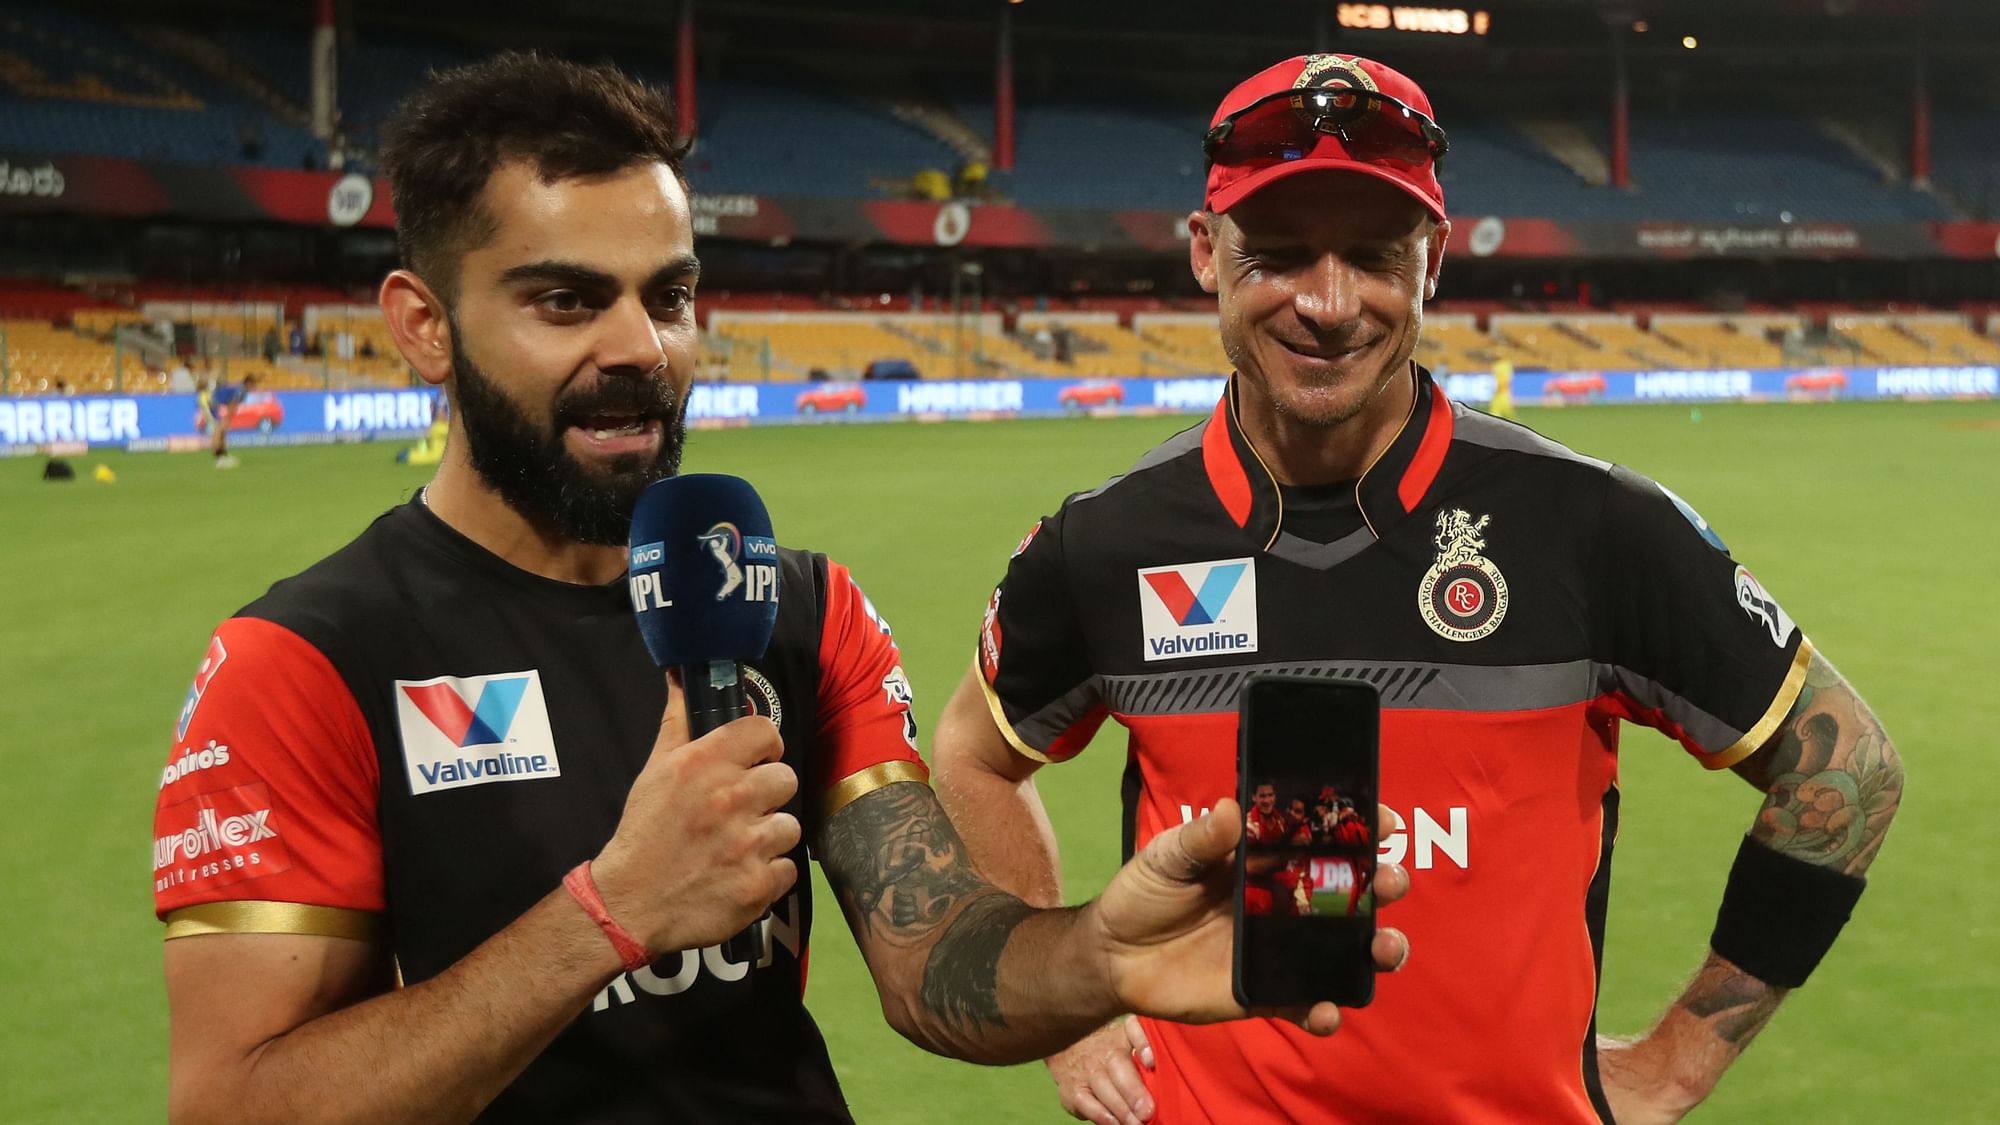 In a video posted on the official IPL website, the Indian skipper can be seen with his RCB teammate, talking about the nostalgia around their 10-year challenge picture.